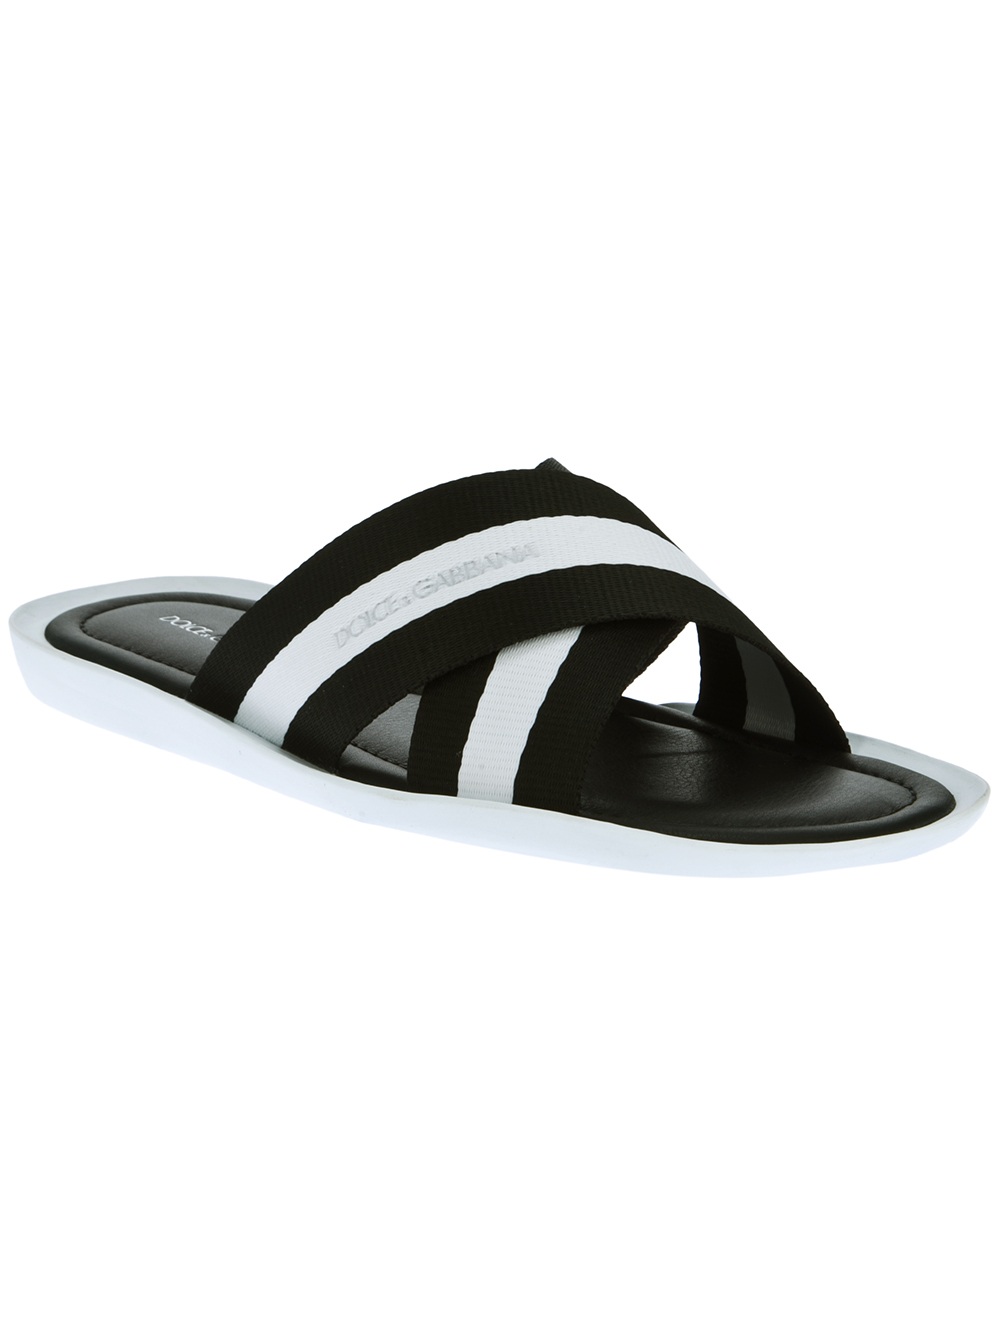 white plastic flip flop from dolce  gabbana featuring a striped cross ...